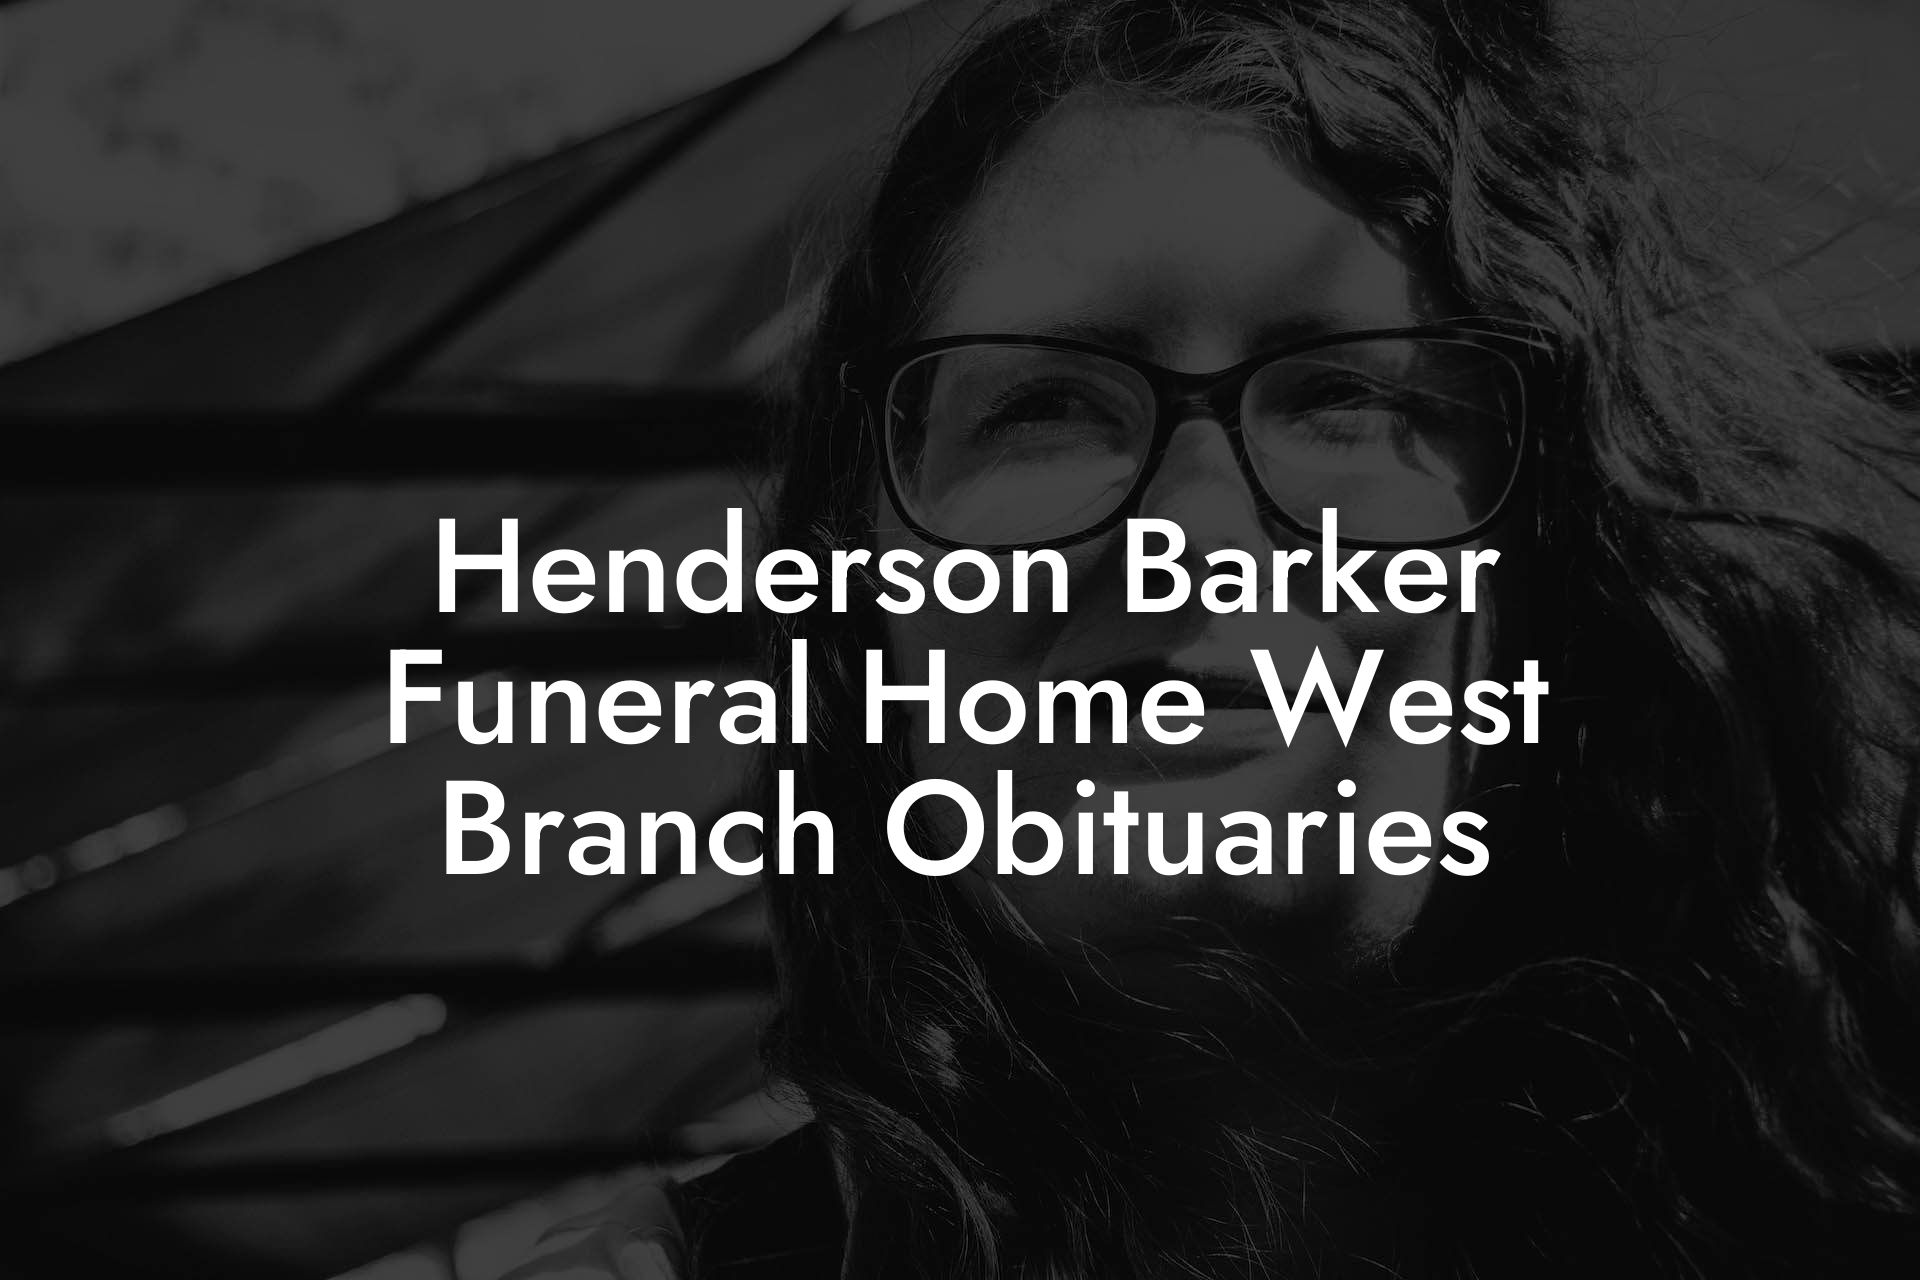 Henderson Barker Funeral Home West Branch Obituaries